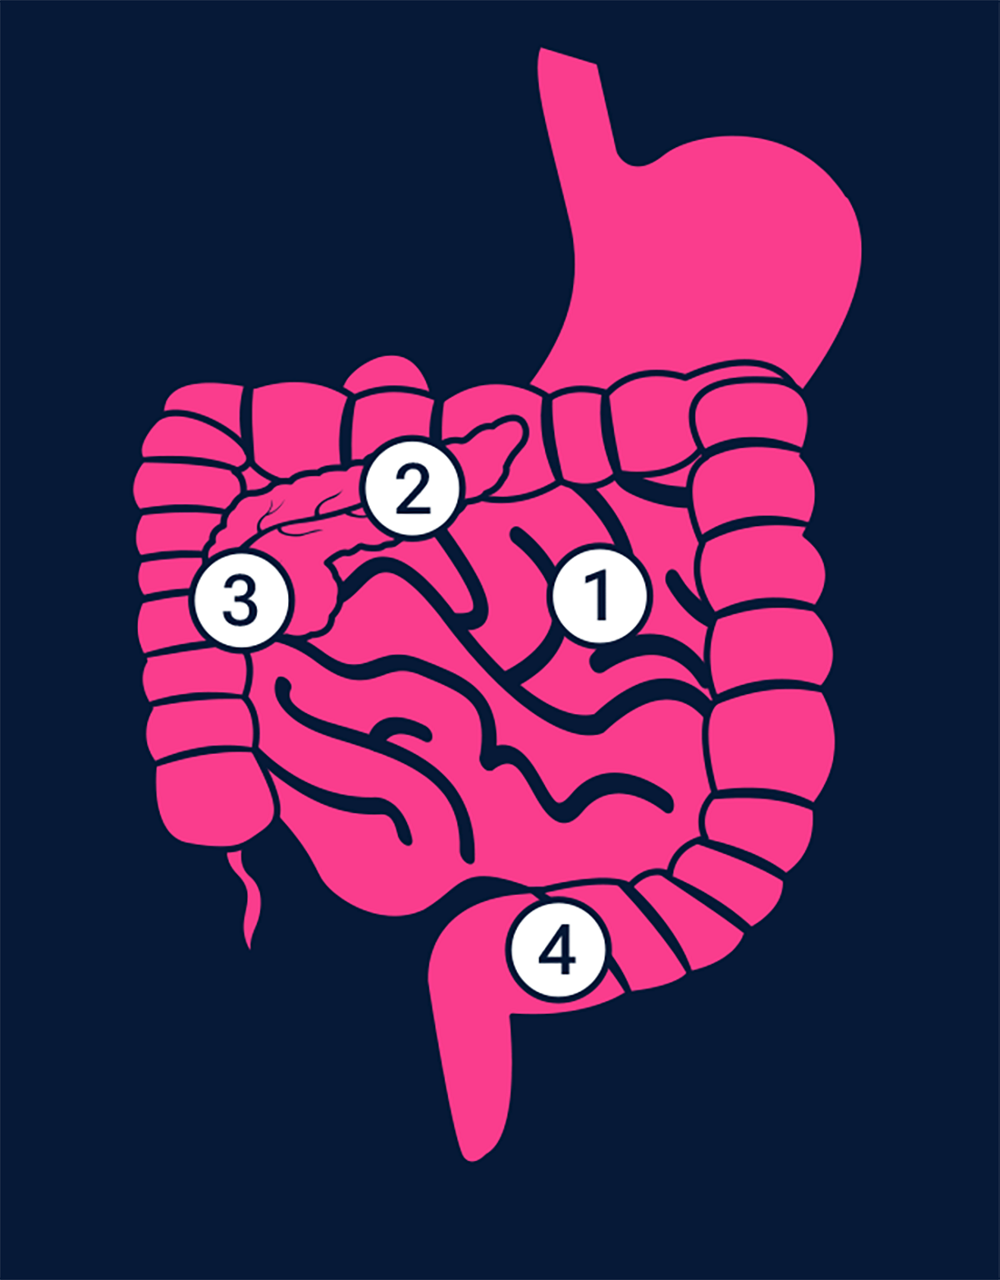 Infographic showing different organs and how they might be affected by GLP-1s.